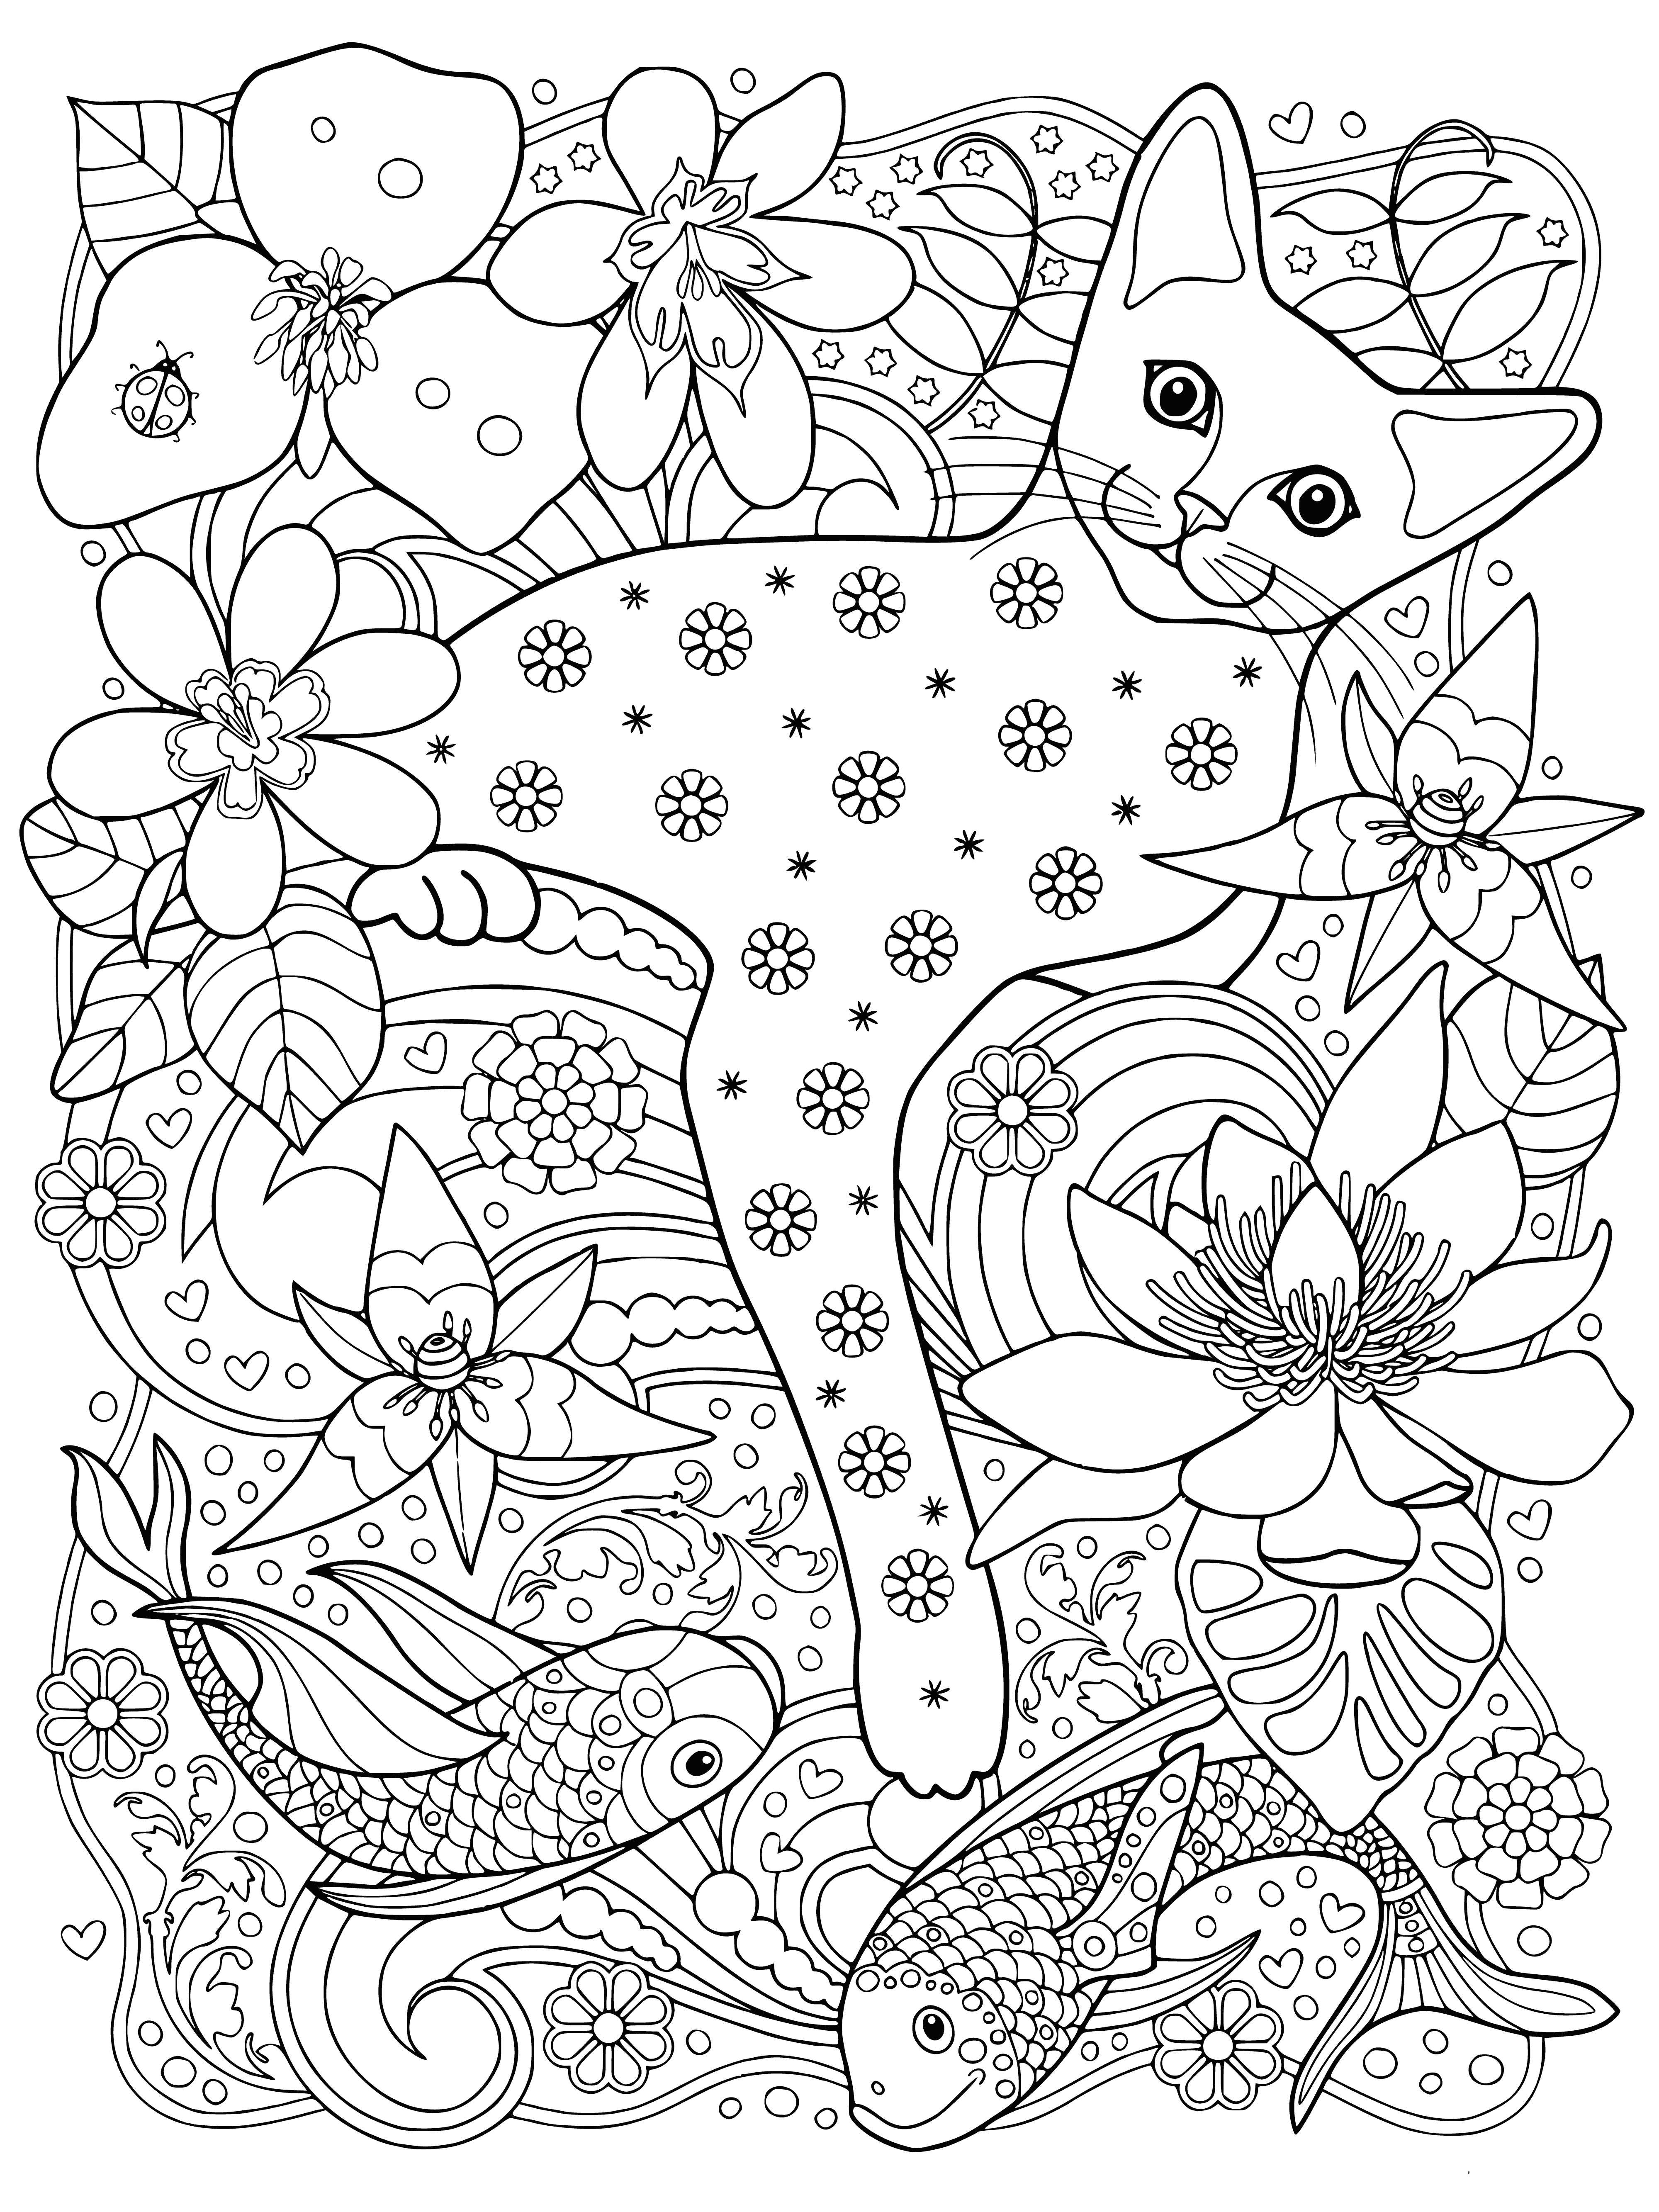 coloring page: Content black cat lies in pool of water exposing belly, surrounded by fish with contentment on face.